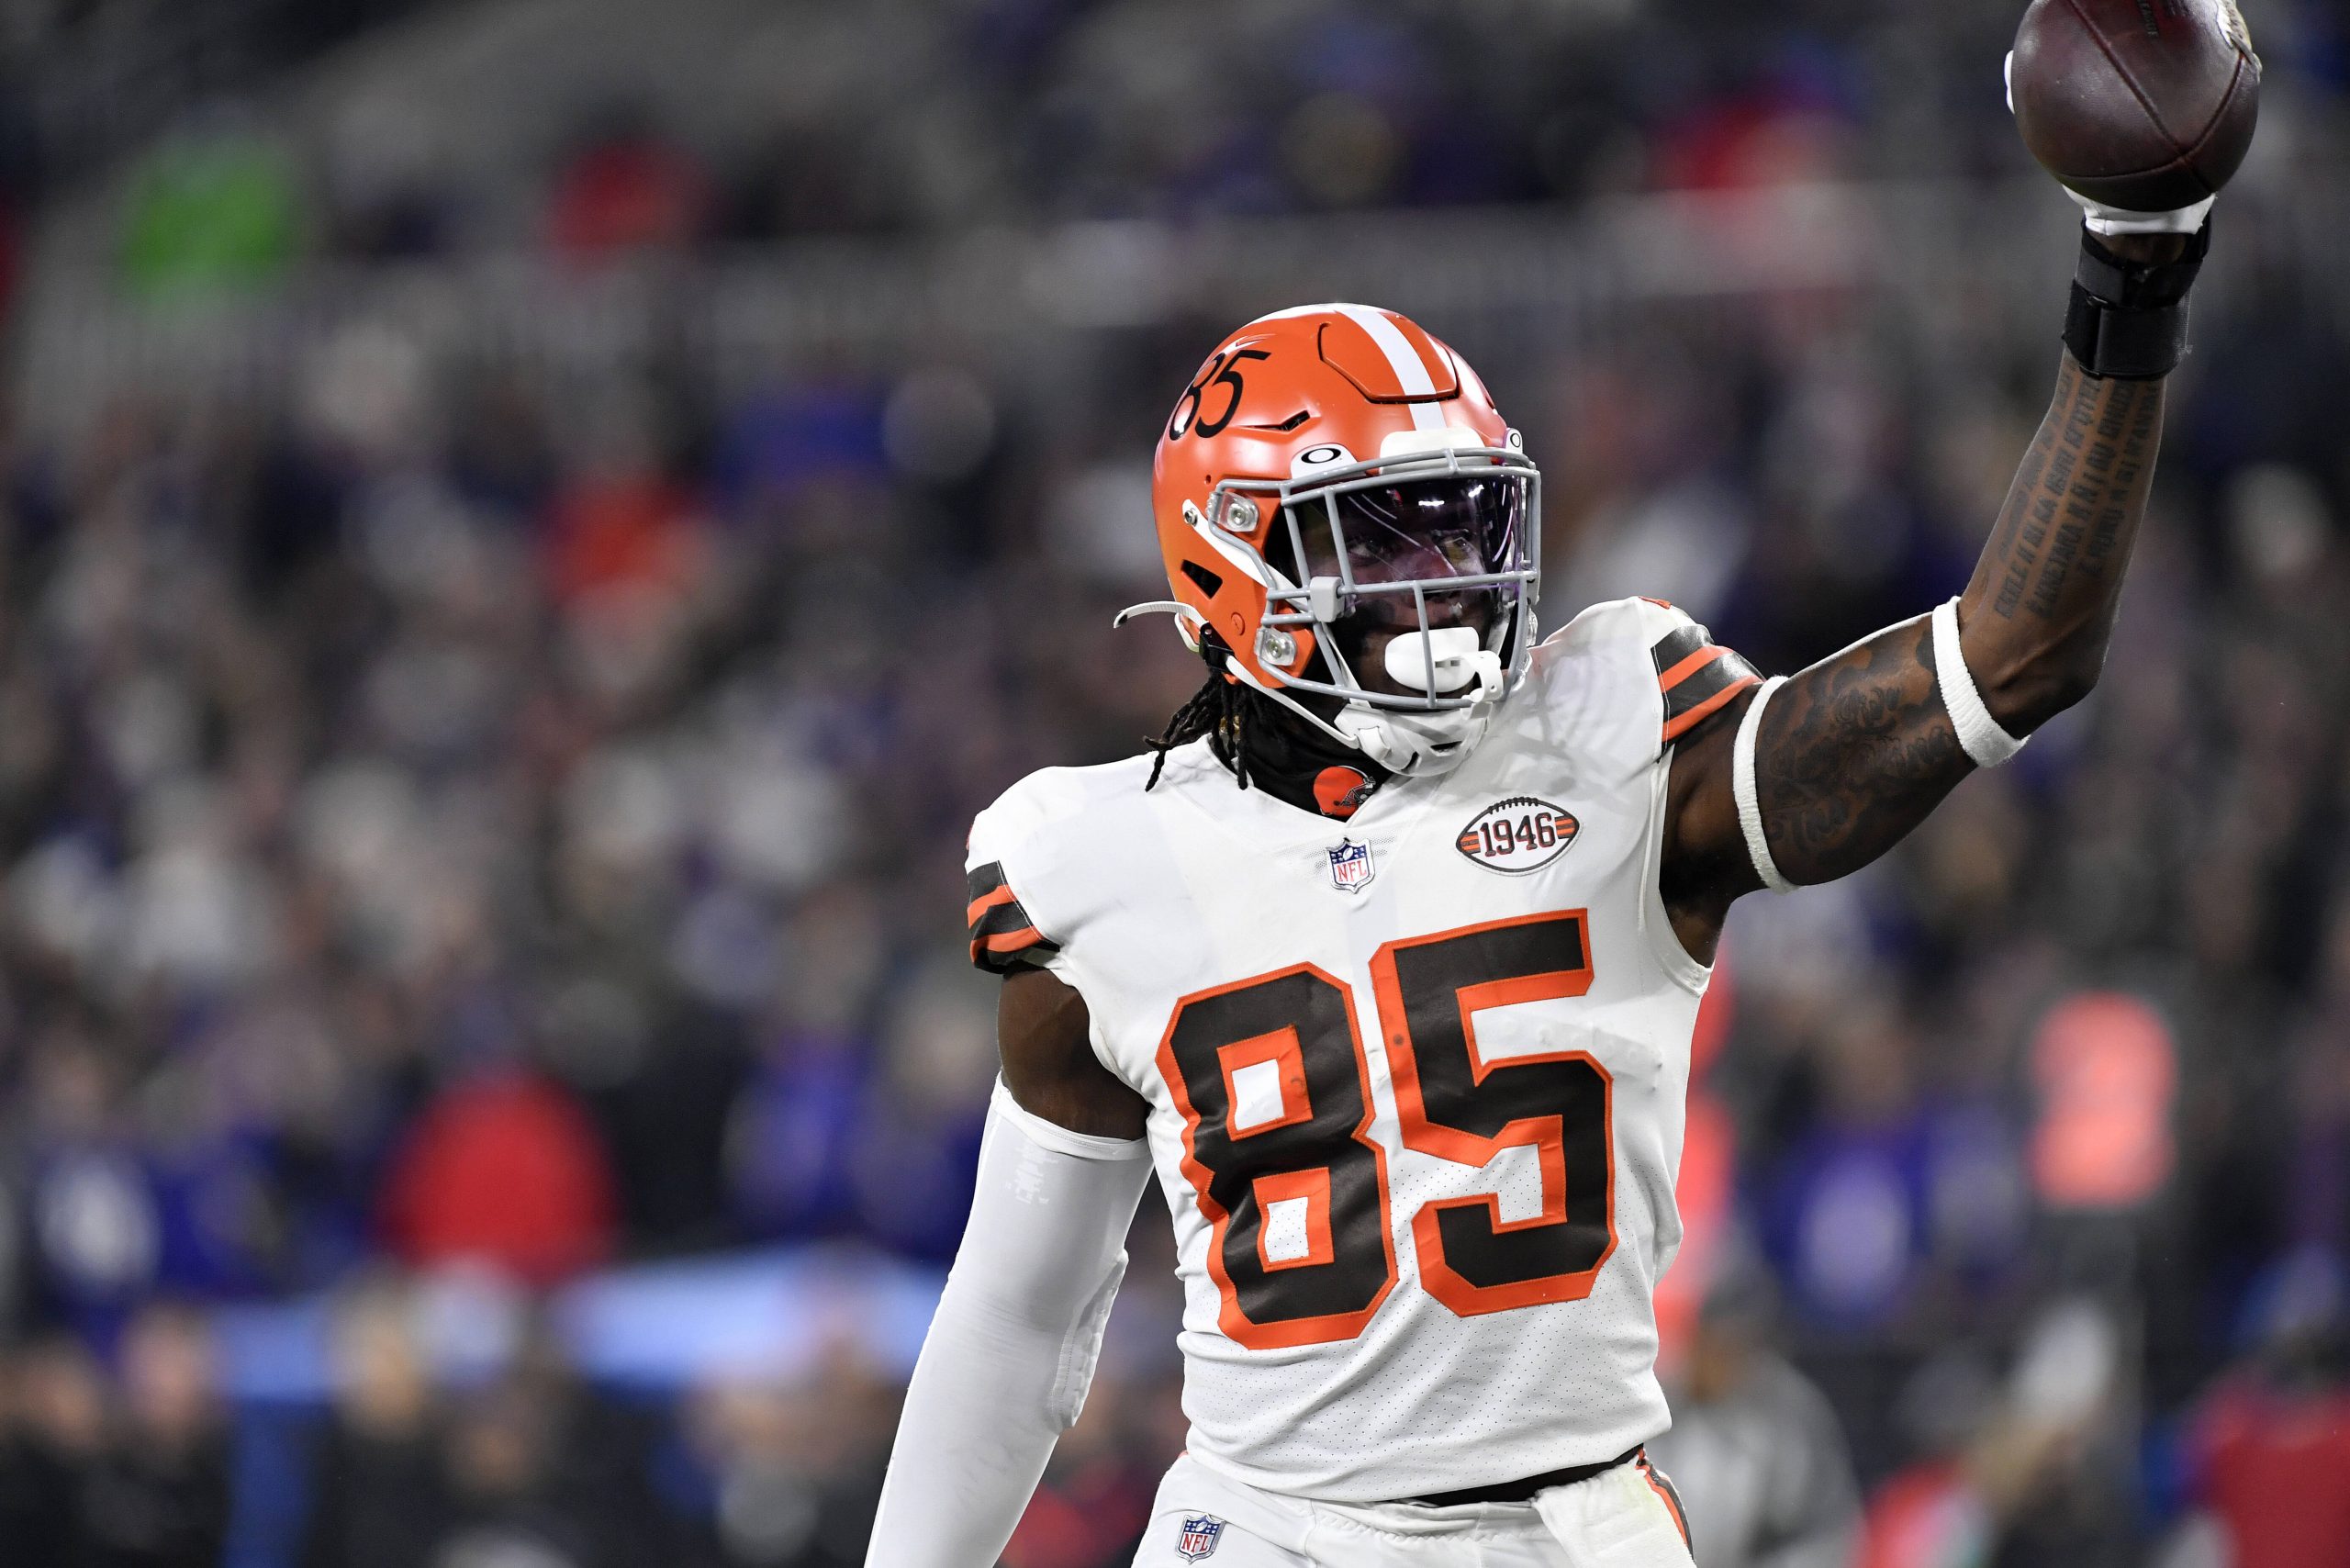 BALTIMORE, MD - NOVEMBER 28: Browns tight end David Njoku 85 celebrates after a catch during the Cleveland Browns versus Baltimore Ravens NFL, American Football Herren, USA game at M&T Bank Stadium on November 28, 2021 in Baltimore, MD. Photo by Randy Litzinger/Icon Sportswire NFL: NOV 28 Browns at Ravens Icon9662111281095